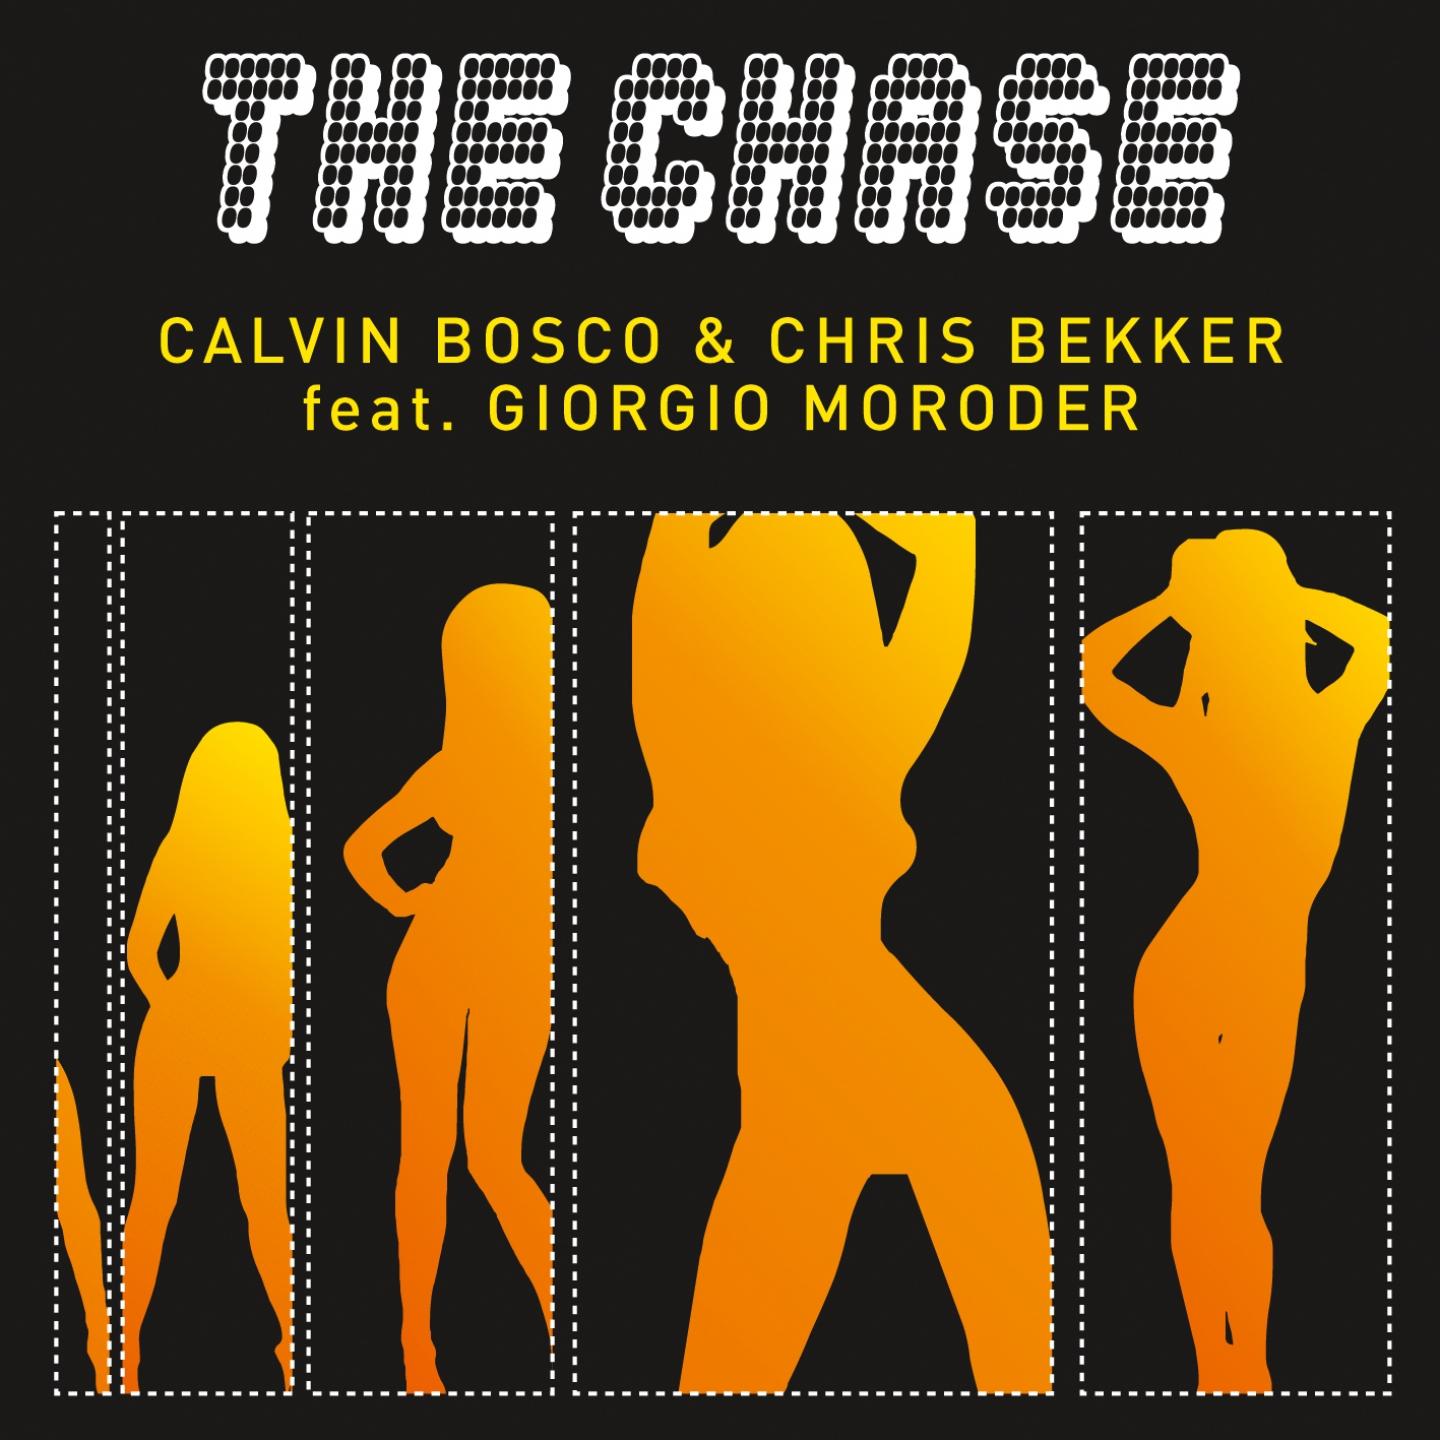 The Chase (Tee's Icon Dub Mix)